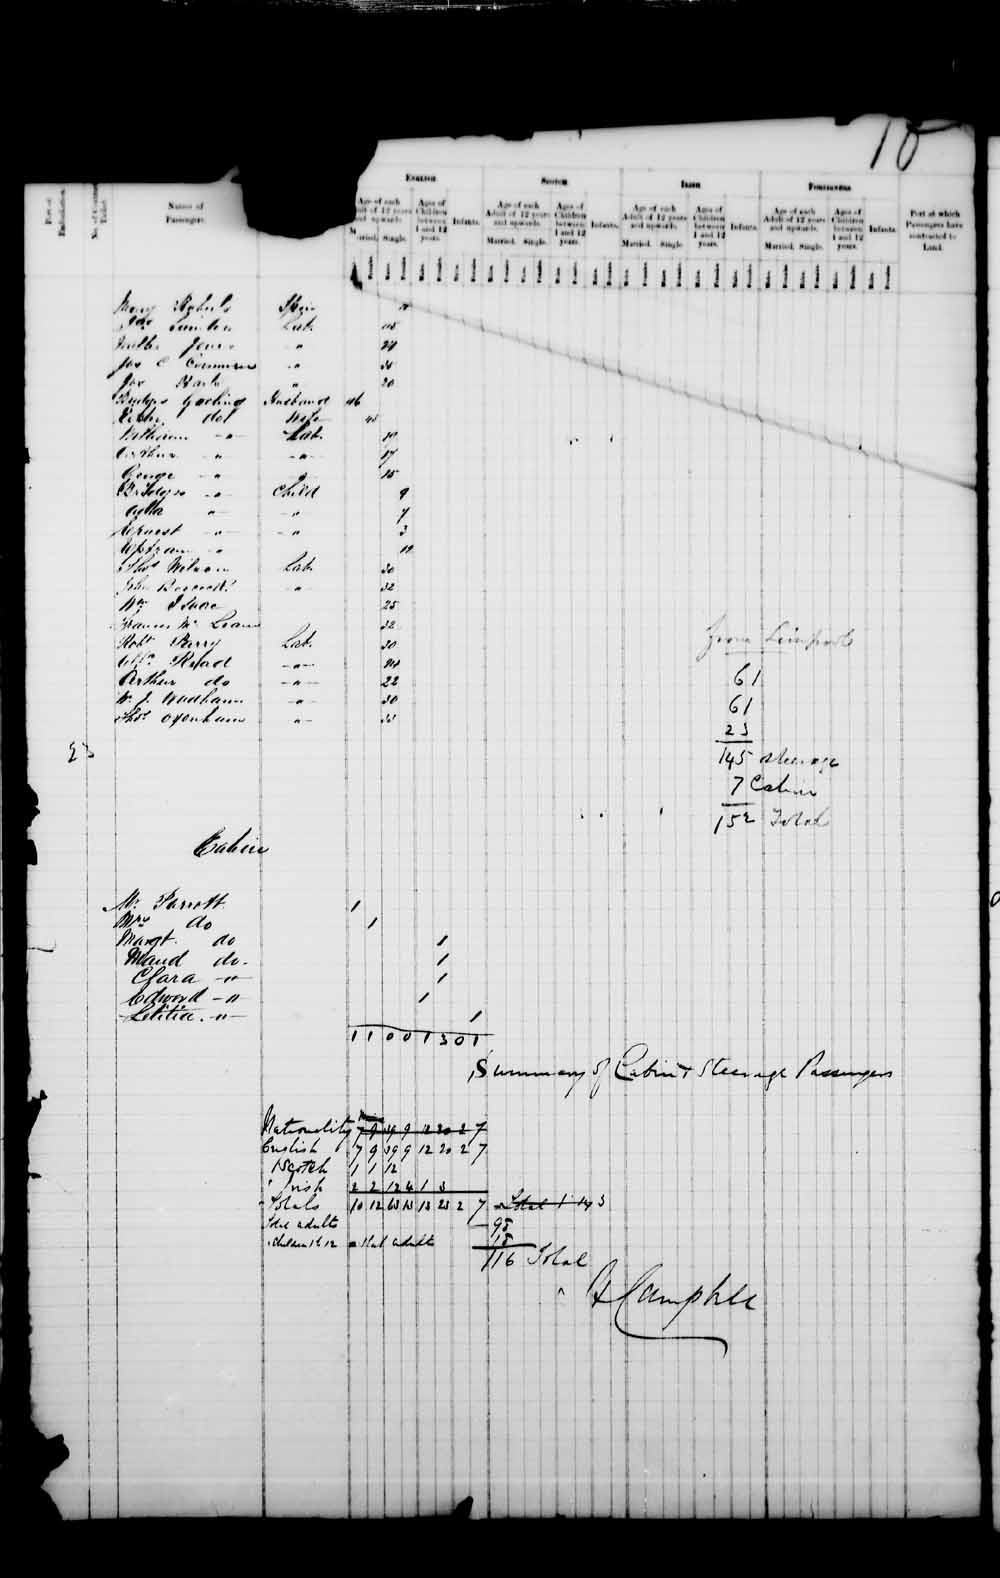 Digitized page of Passenger Lists for Image No.: e003541454